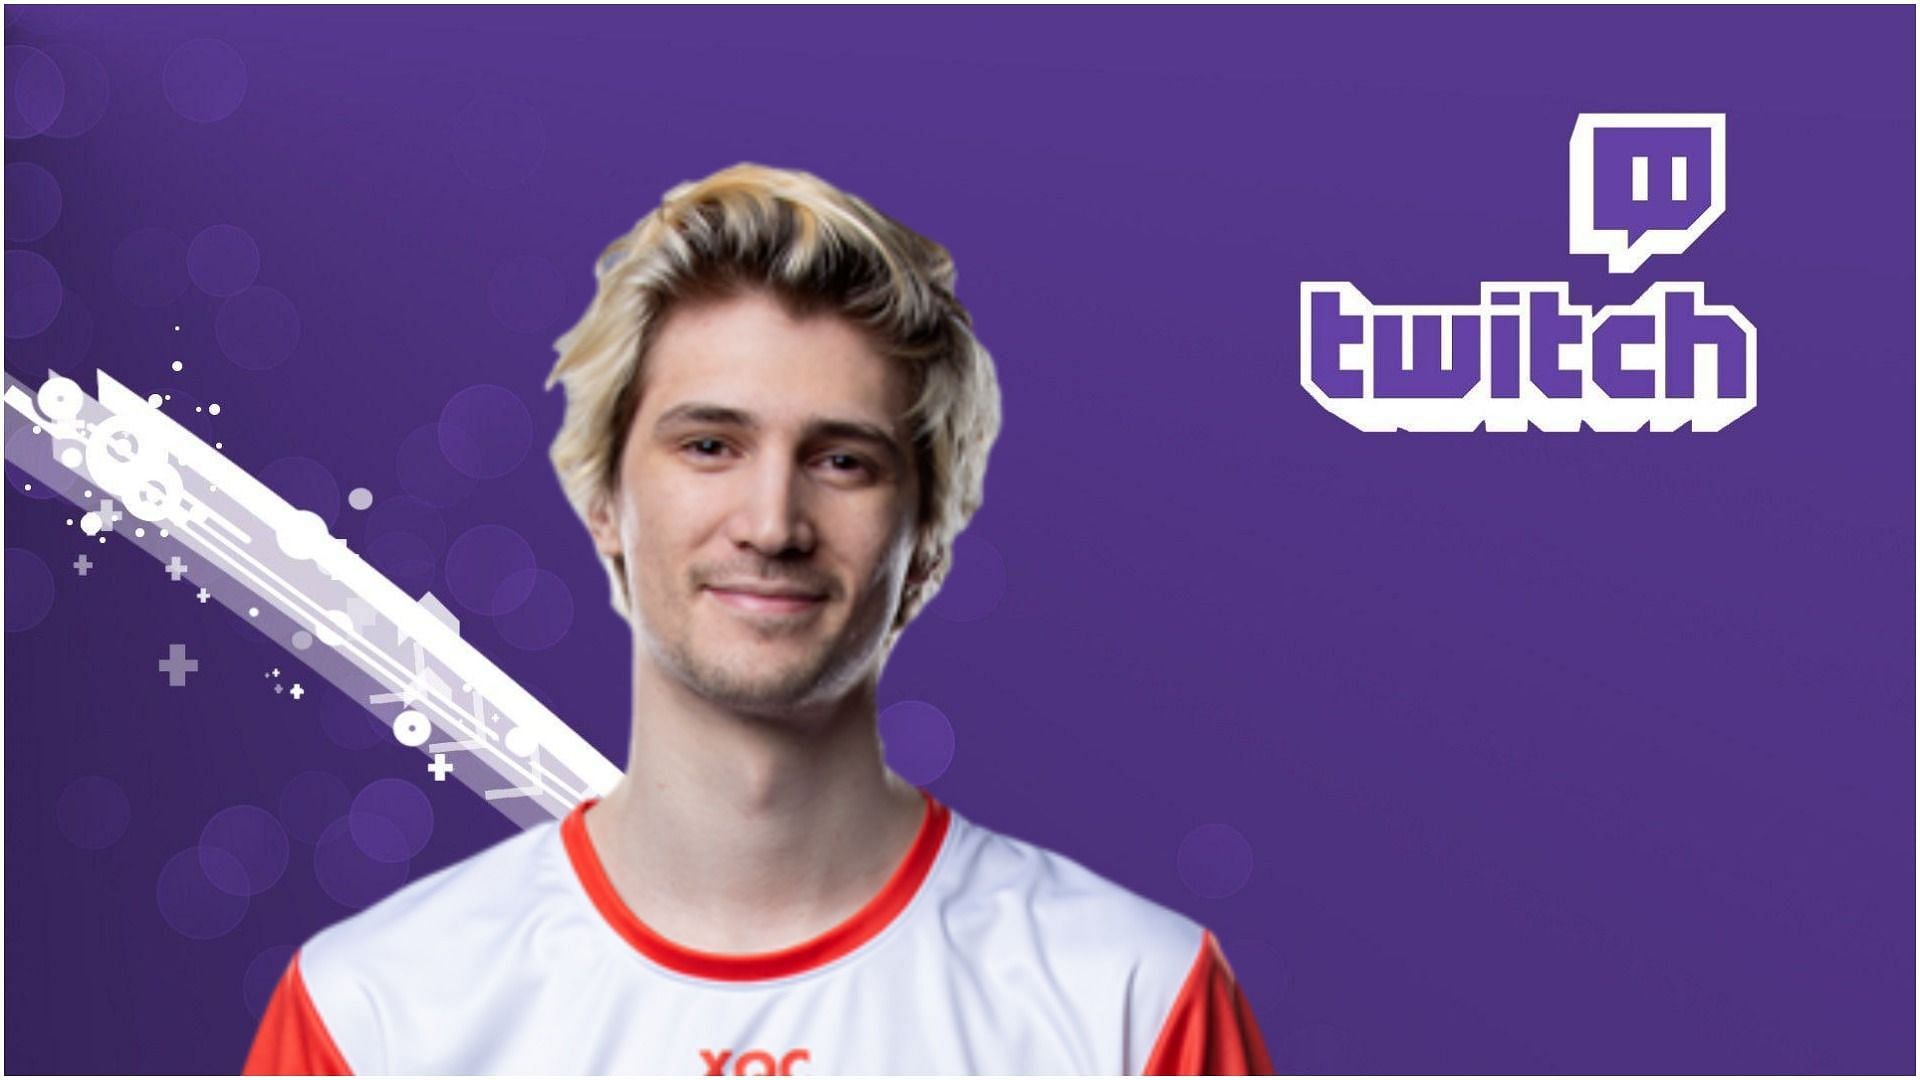 xQc urges his community to support smaller streamers (Image via Reddit and WallpaperAccess)